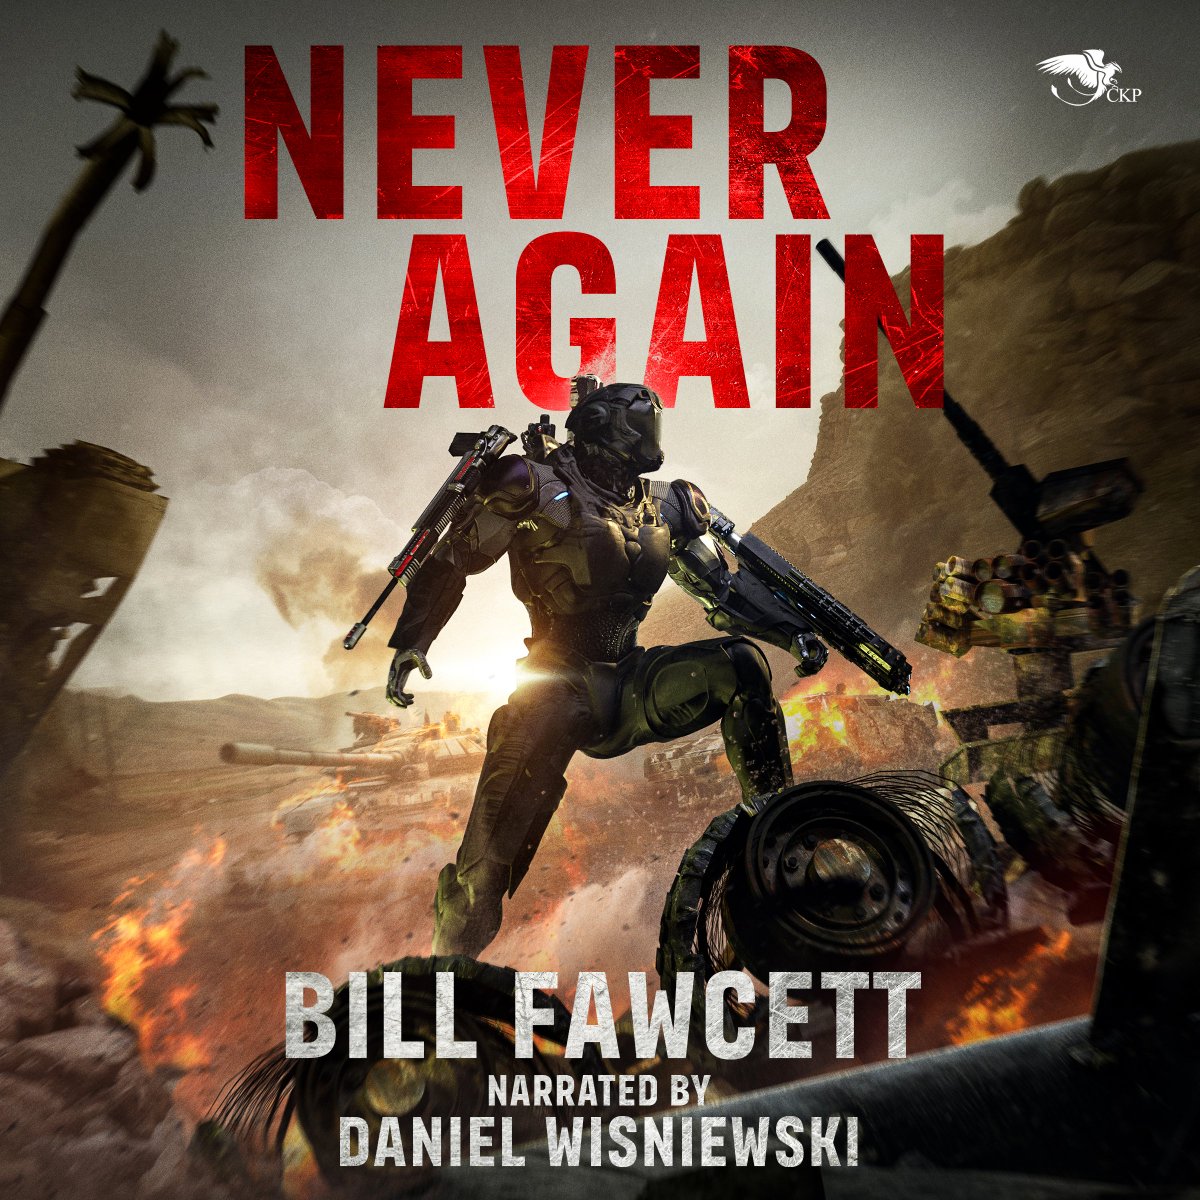 Audiophiles, unite! The audio book for Bill Fawcett's 'Never Again' is out on Audible. Narrated  by Daniel Wisniewski, this one is a winner!

#CKP #TheogonyBooks #AudioBook #JustReleased